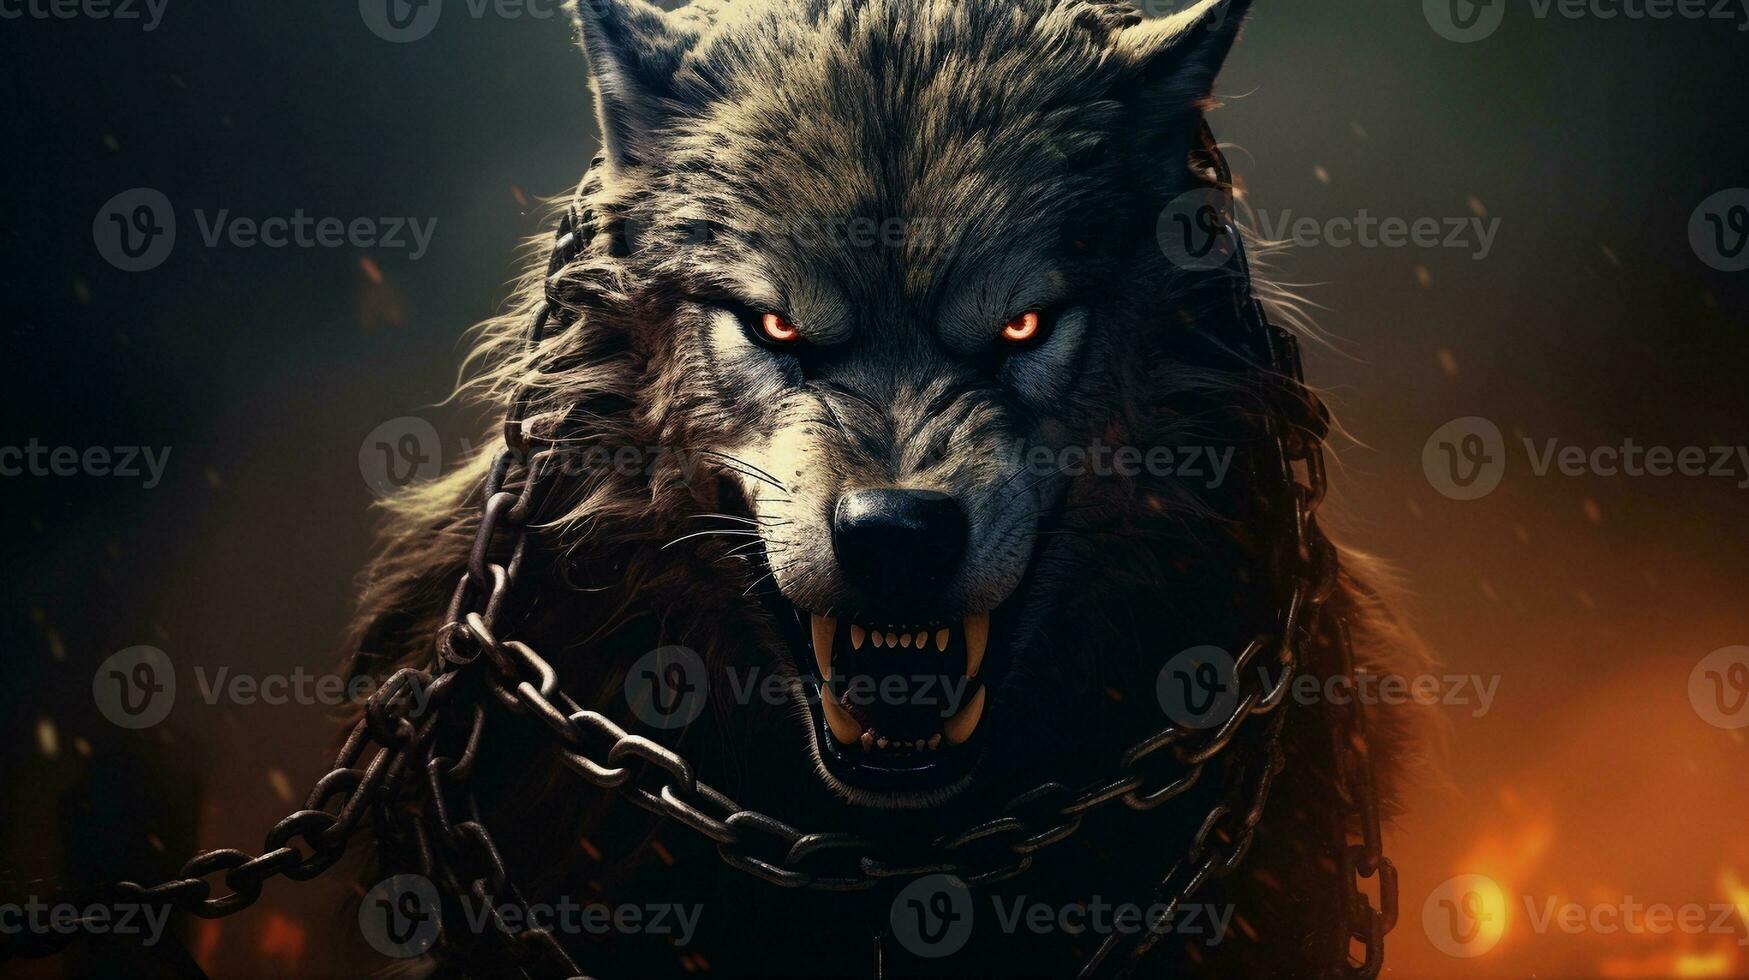 An image depicting Fenrir, the mythical wolf from Norse mythology, with menacing features and chains, background image, AI generated photo